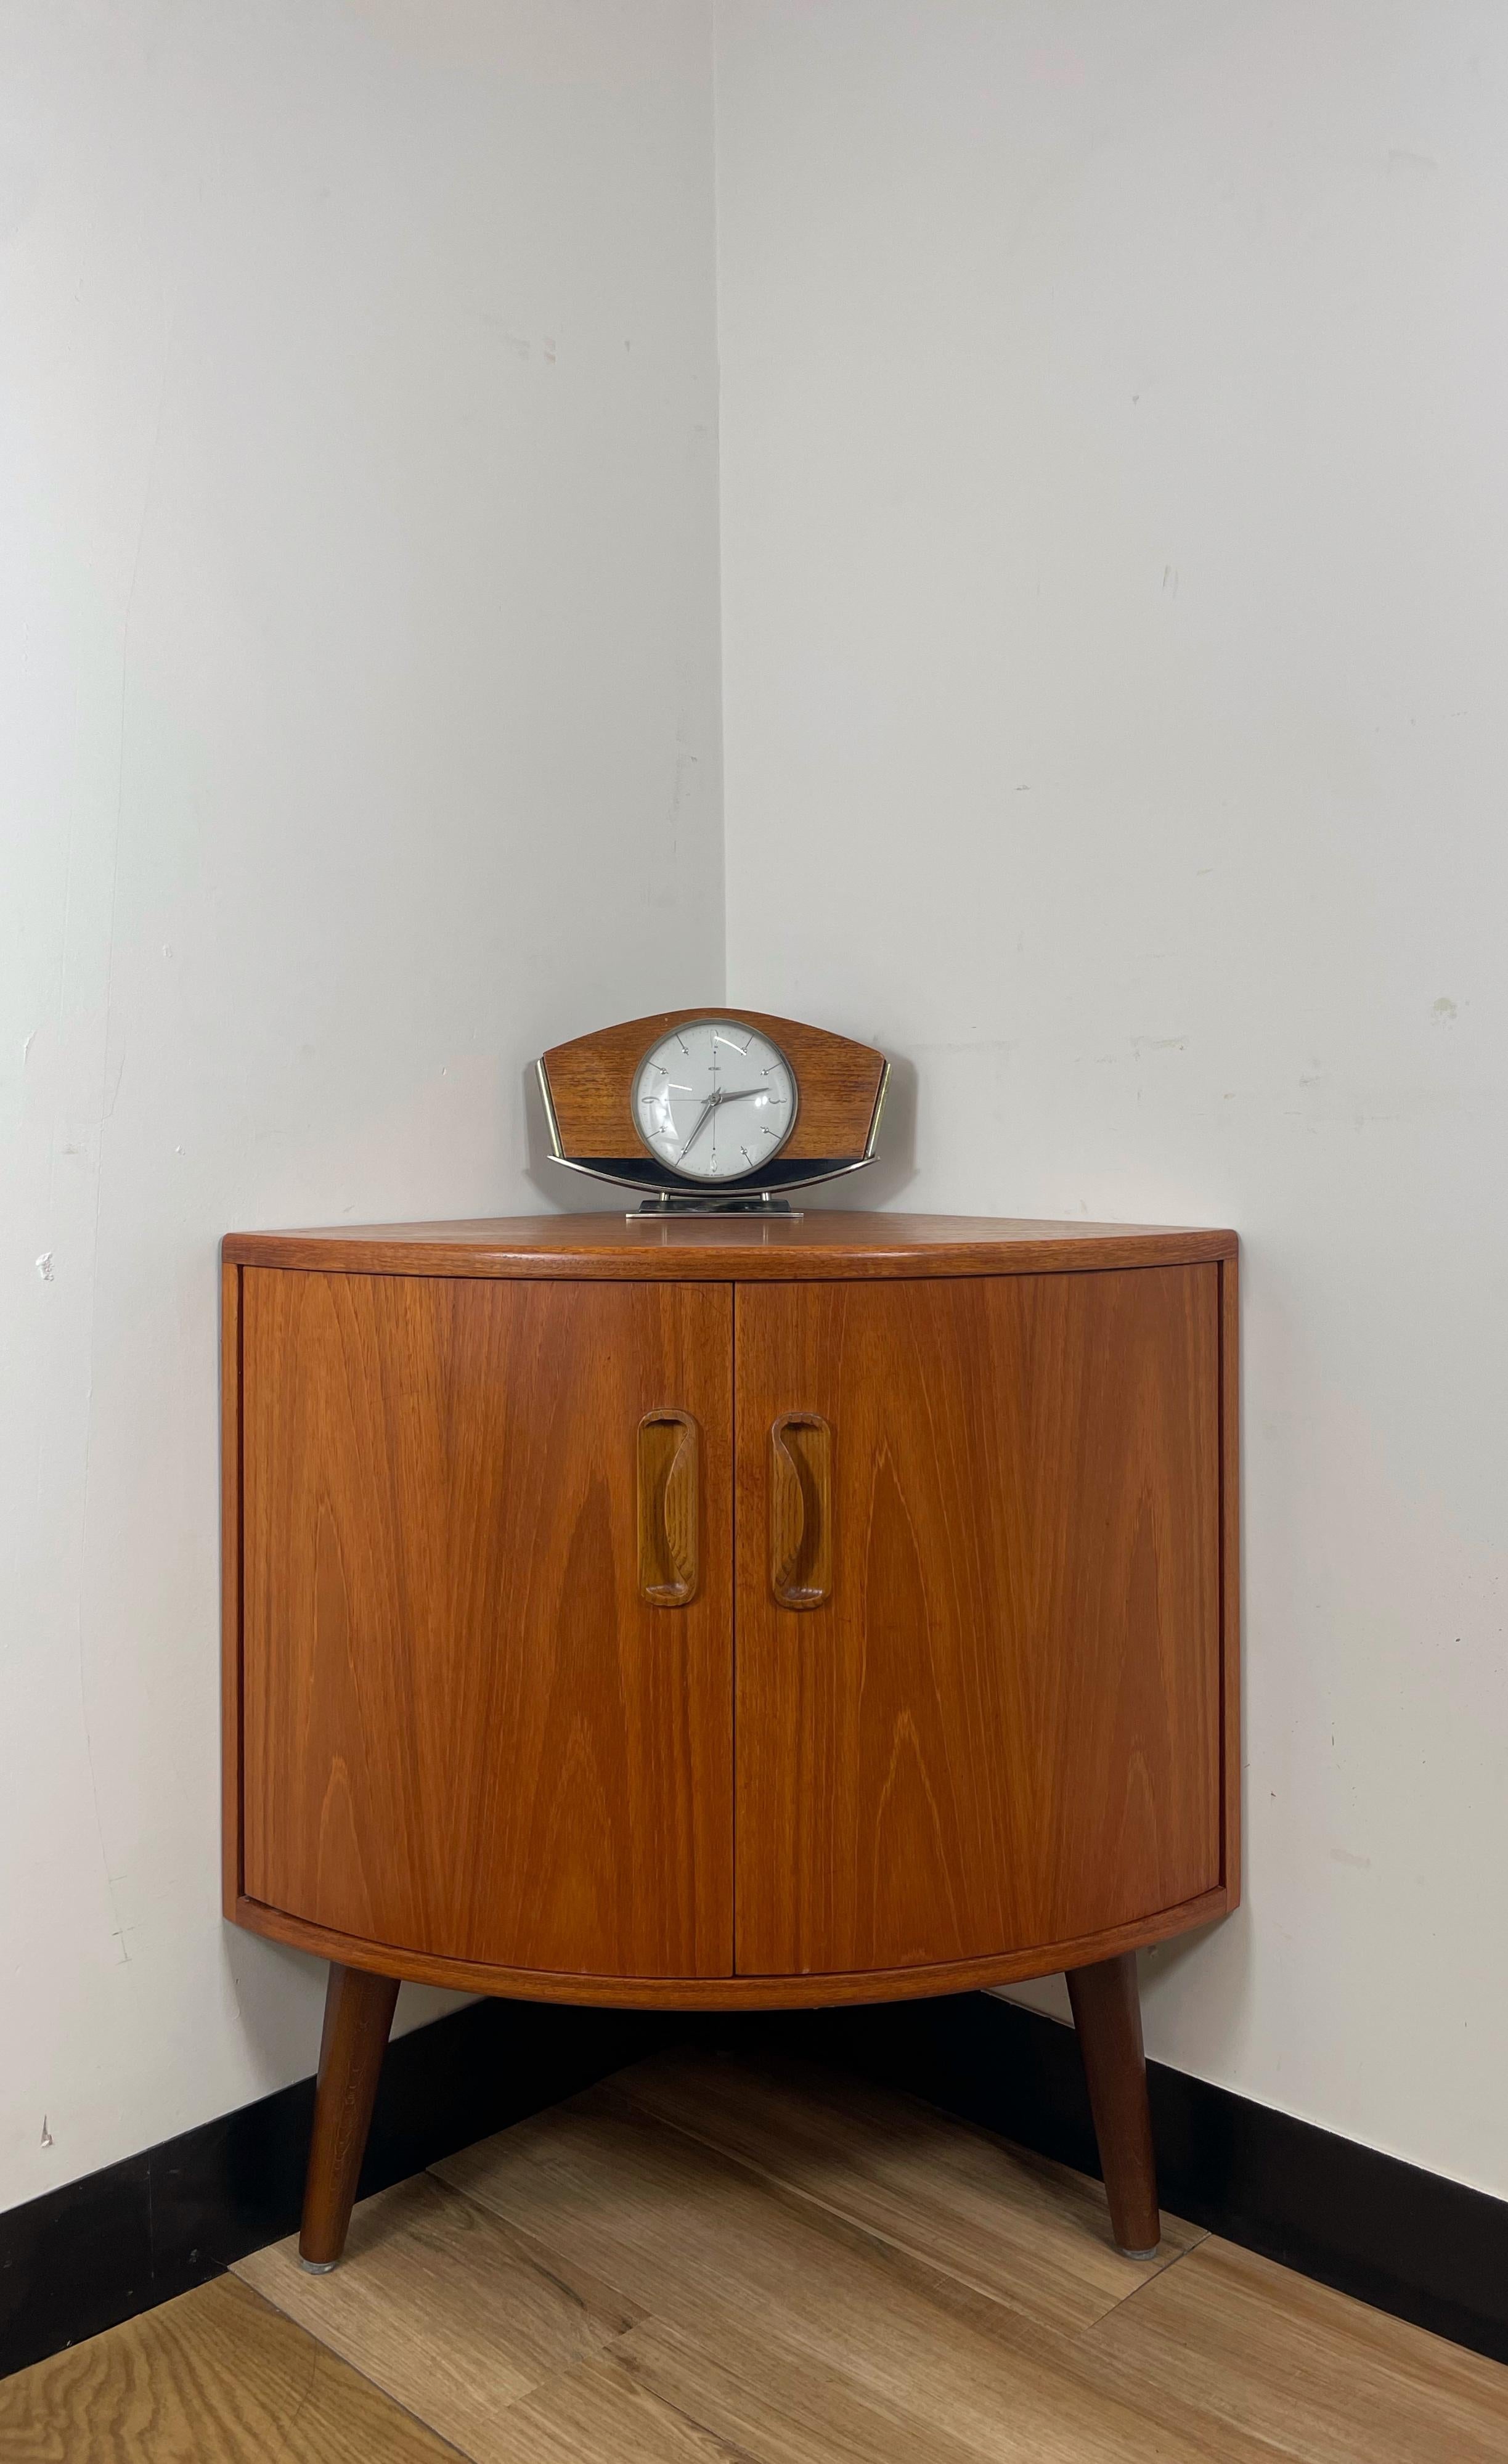 We’re happy to provide our own competitive shipping quotes with trusted couriers. Please message us with your postcode for a more accurate price. Thank you.

Beautiful G Plan Fresco mid-century teak corner cabinet. Very stylish design standing on